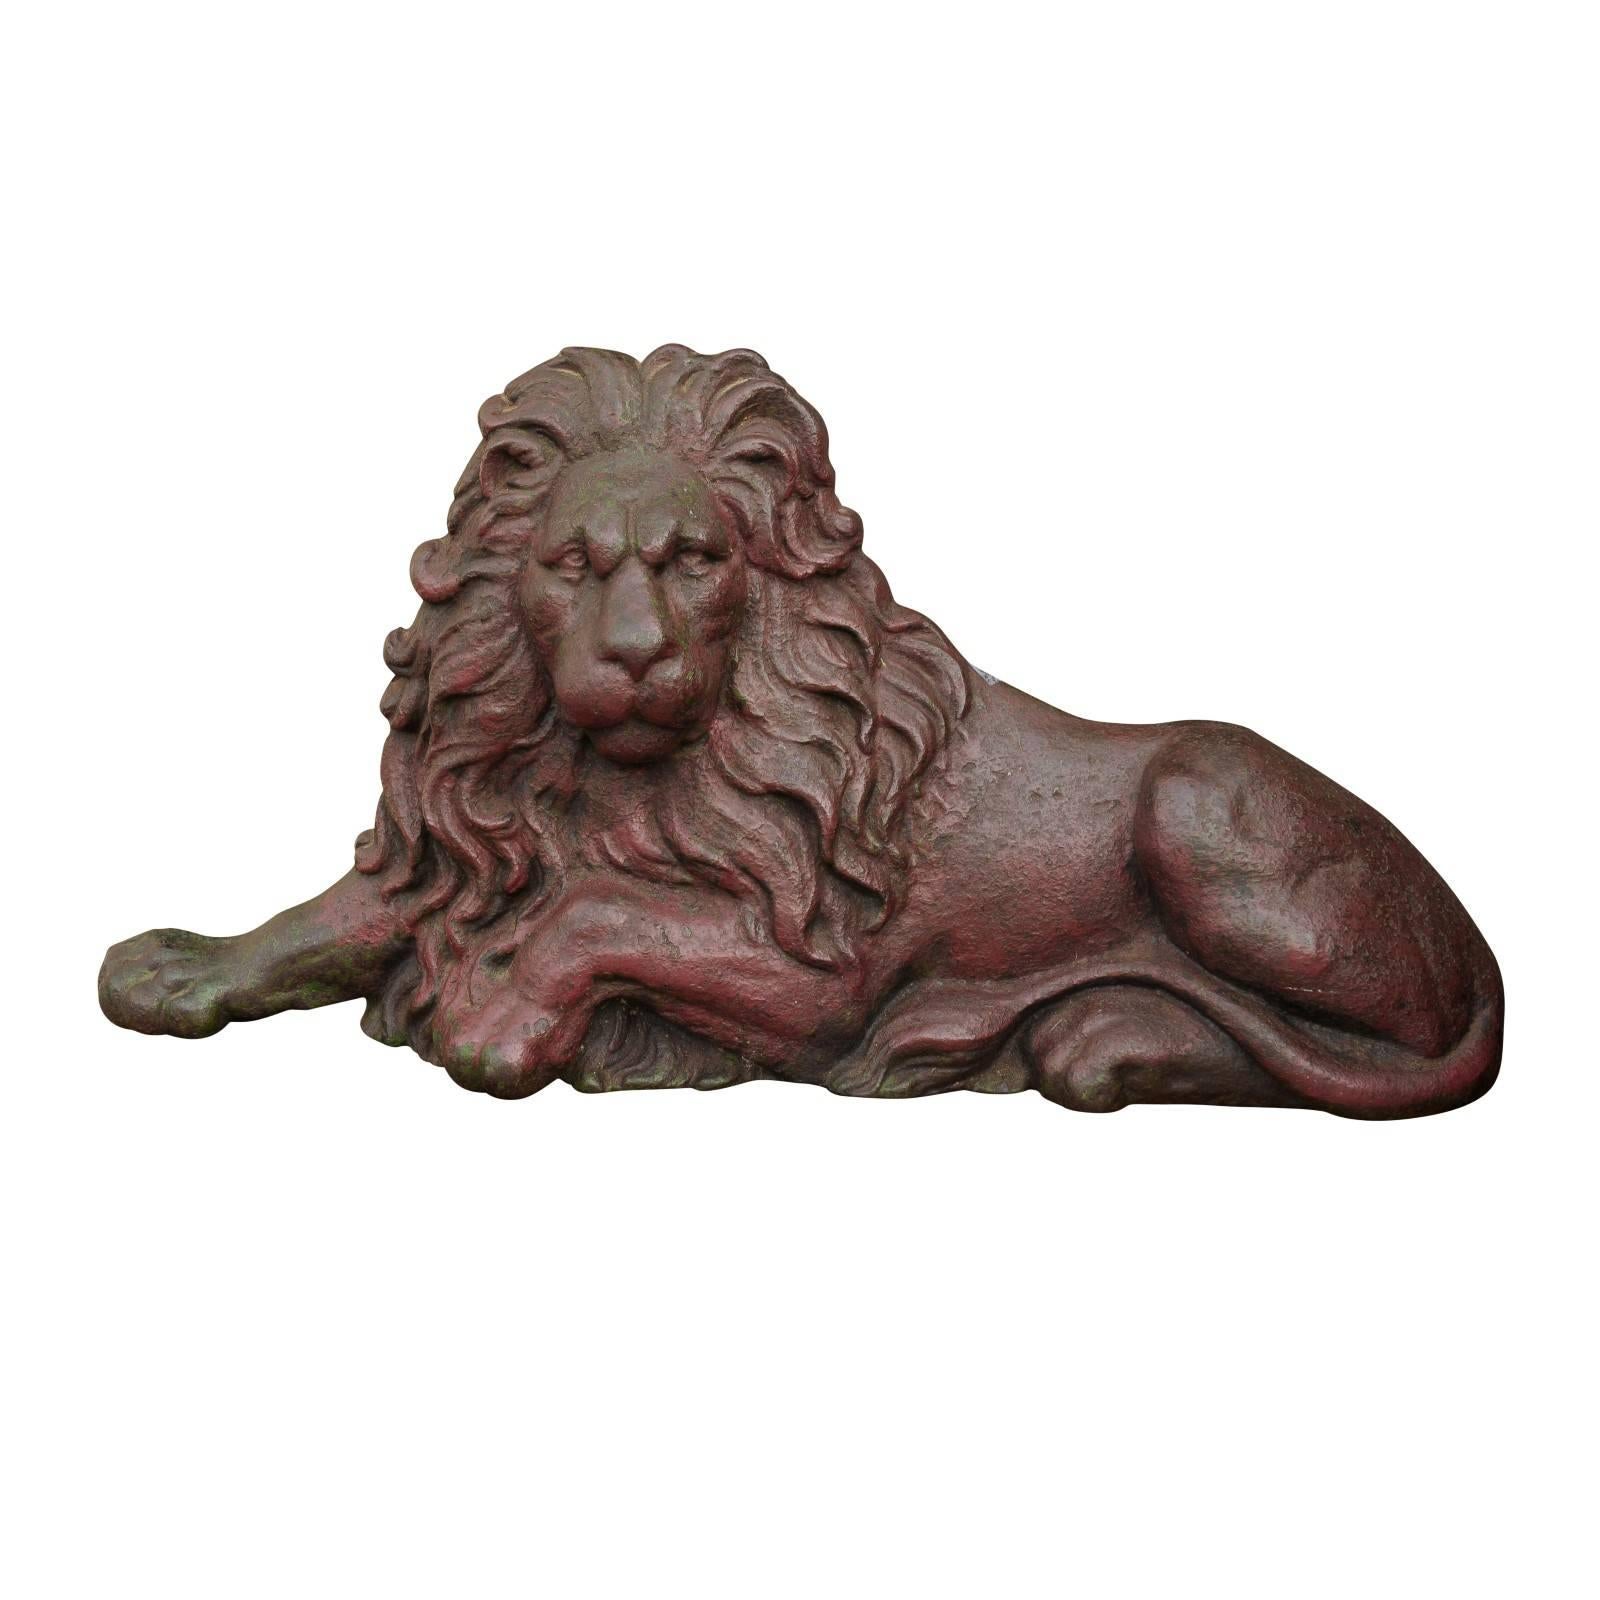 19th century Victorian English Cast-Iron Lion Doorstop with Old Red Patina For Sale